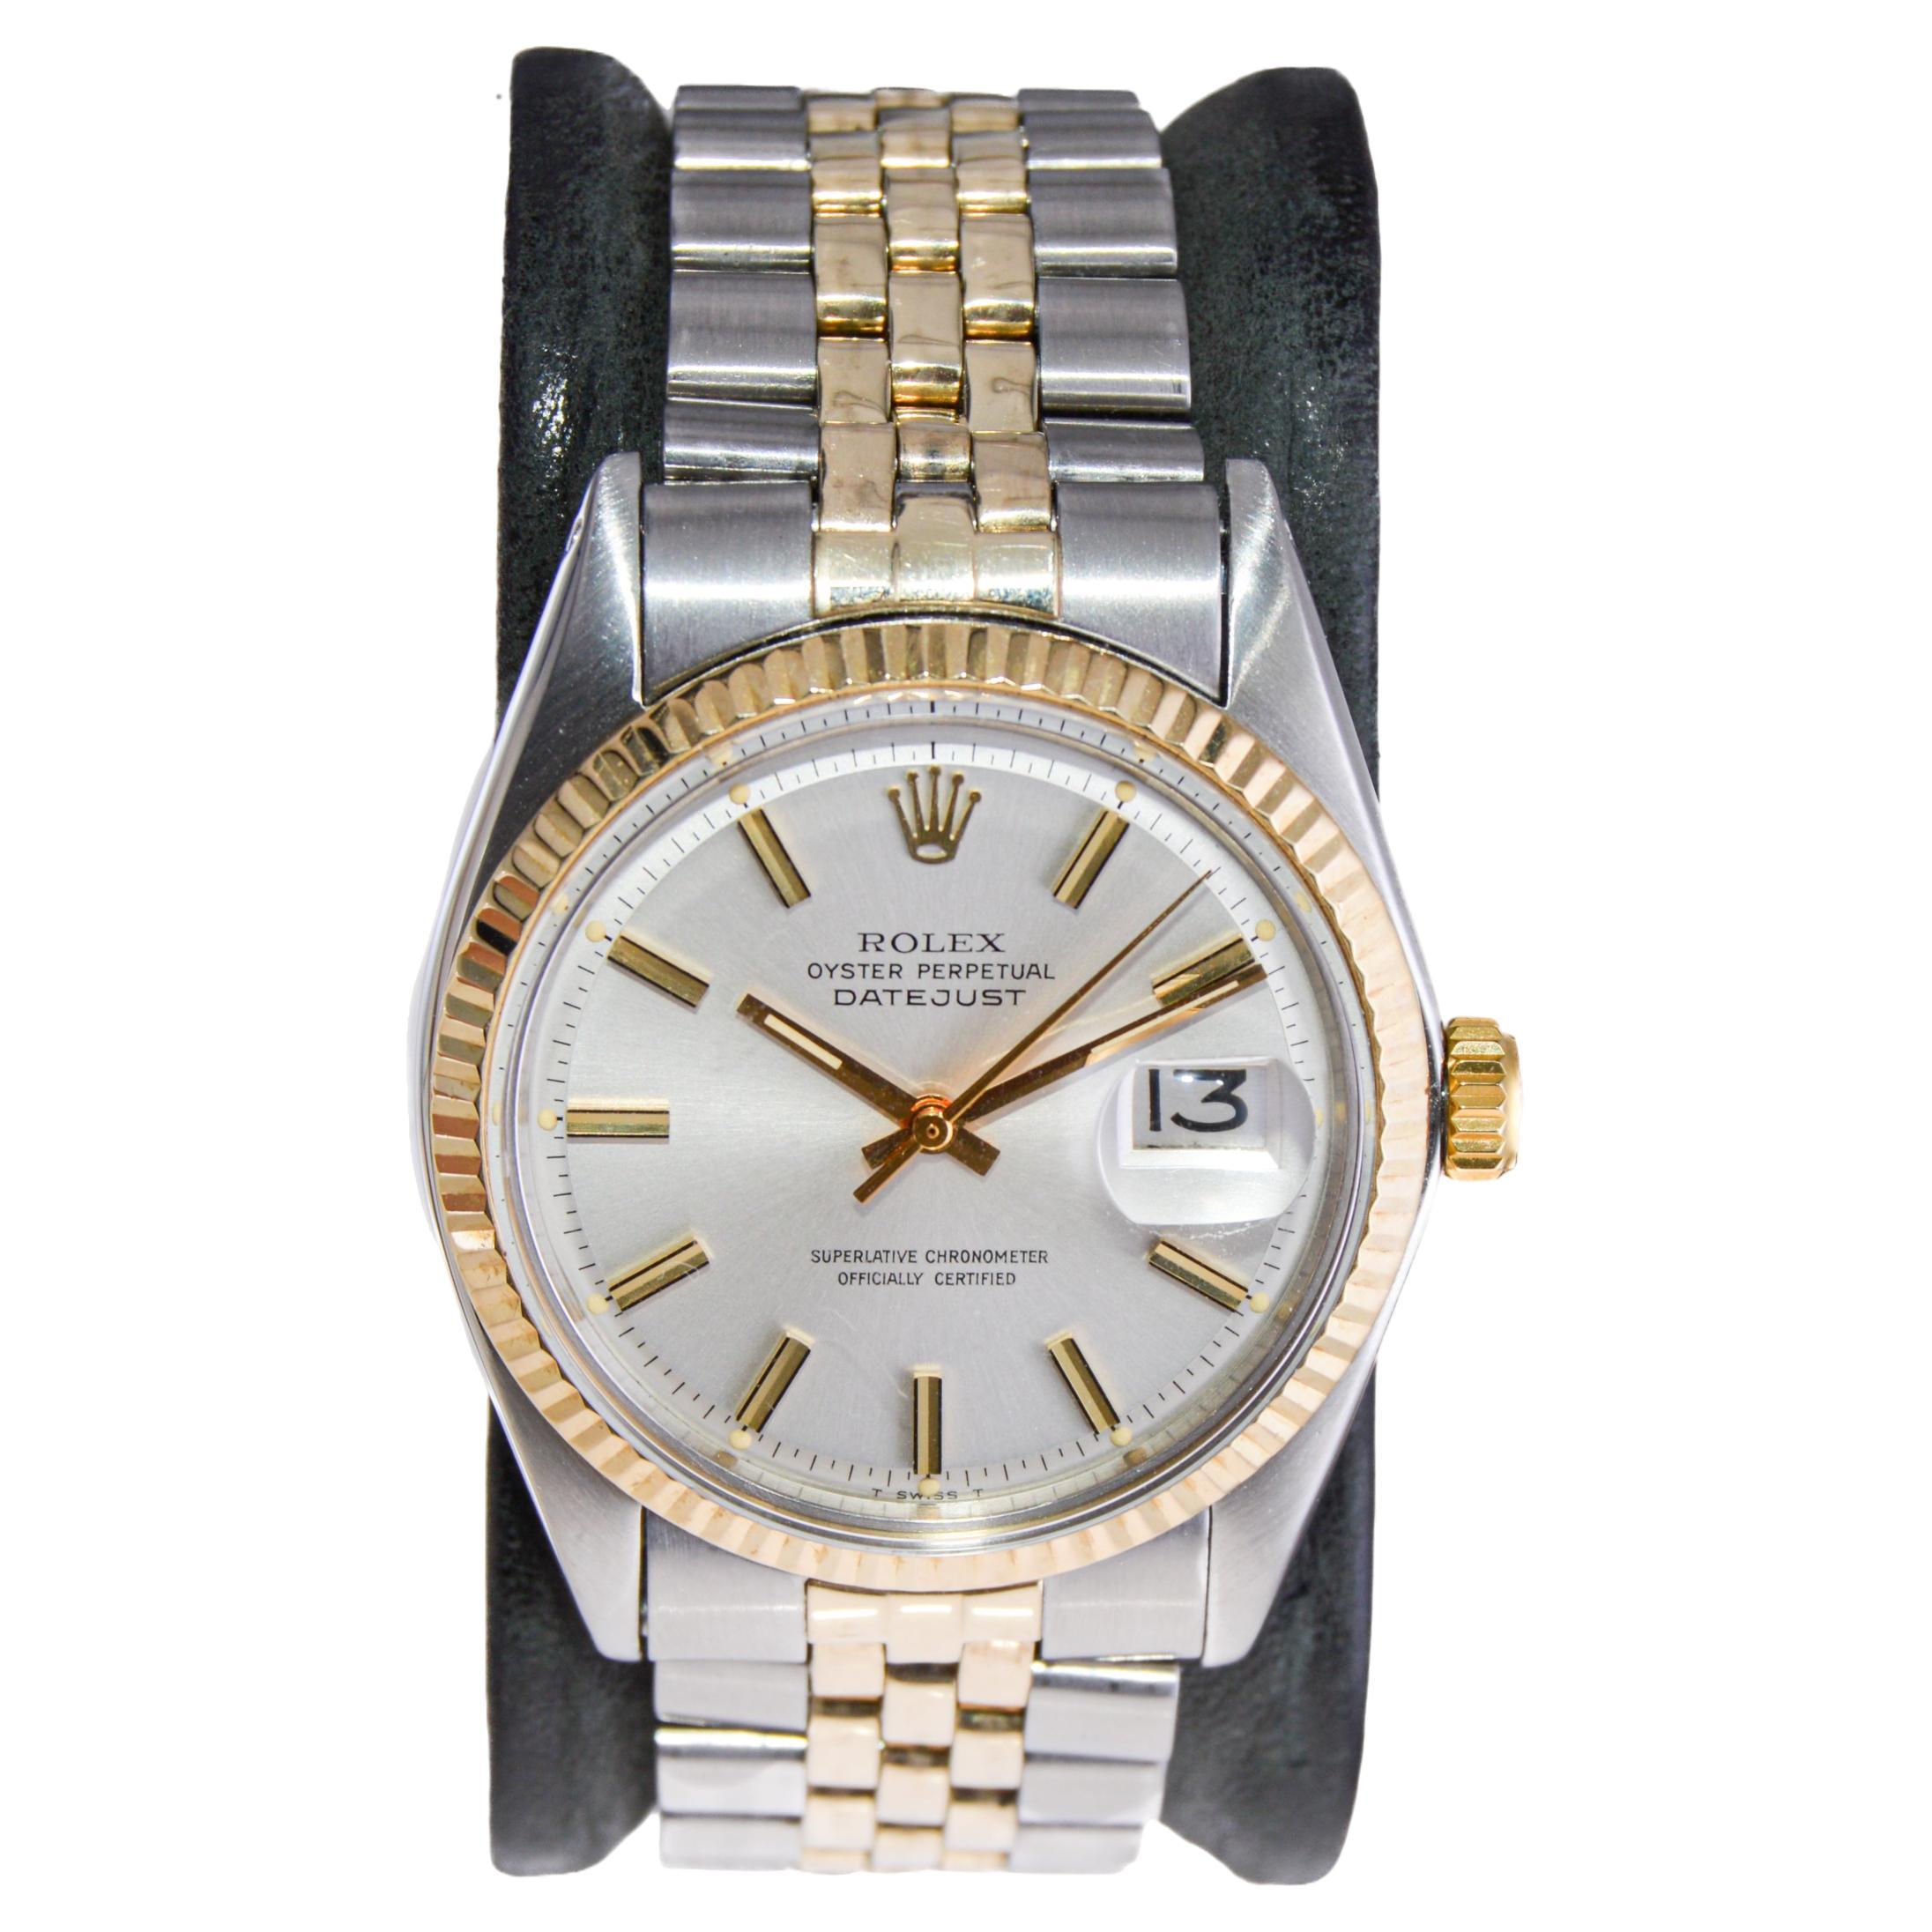 FACTORY / HOUSE: Rolex Watch Company
STYLE / REFERENCE: Oyster Perpetual Datejust / Reference 1601
METAL / MATERIAL: Stainless Steel / 14Kt Yellow Gold
DIMENSIONS / SIZE: Length 44mm x Diameter 36mm
MOVEMENT / CALIBER: Perpetual Winding / 26 Jewels